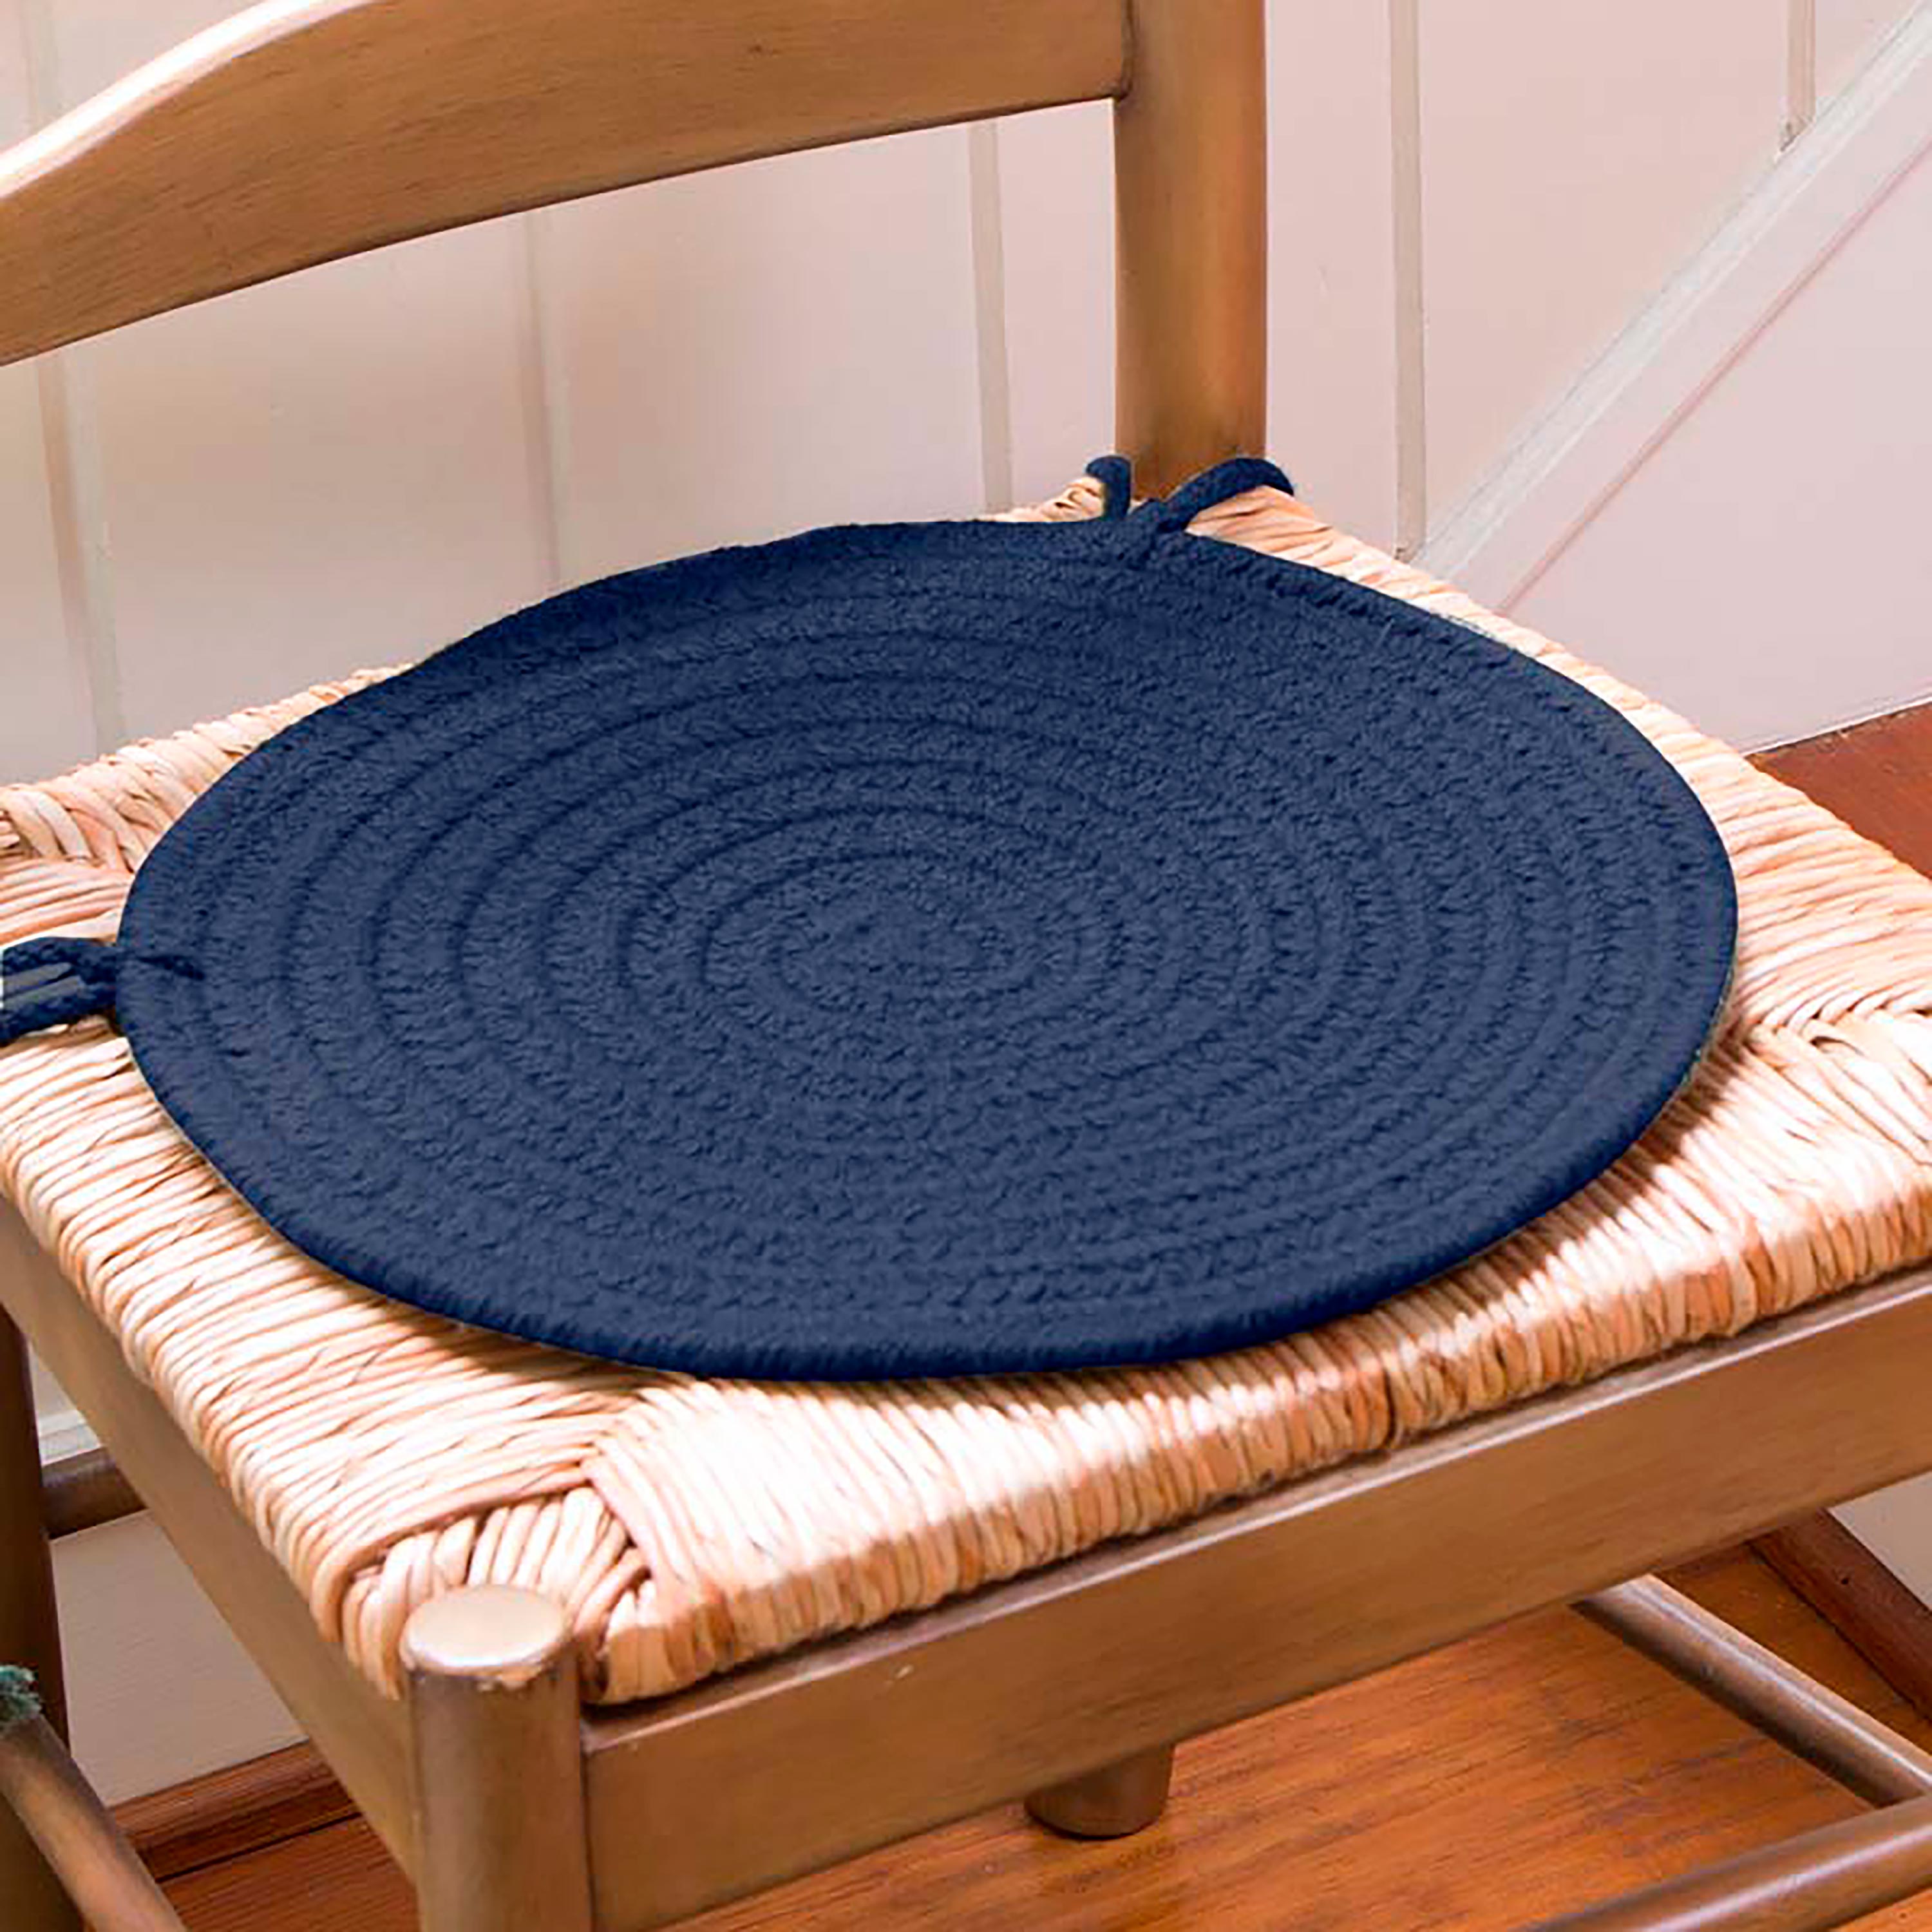 Image of 15" Dia. Color Country Classic Braided Polypro Chair Pad, in Navy